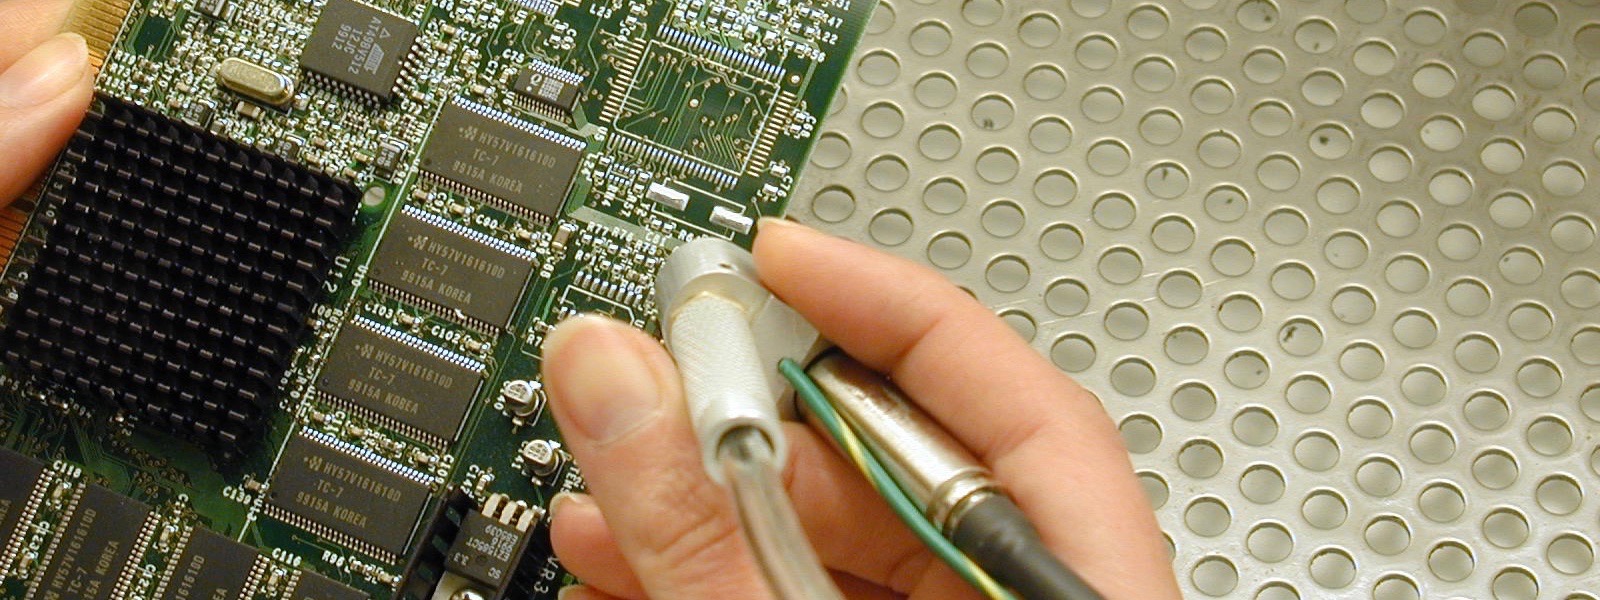 Conformal Coating Removal from Circuit Boards, ESD Control with Point Ionizer